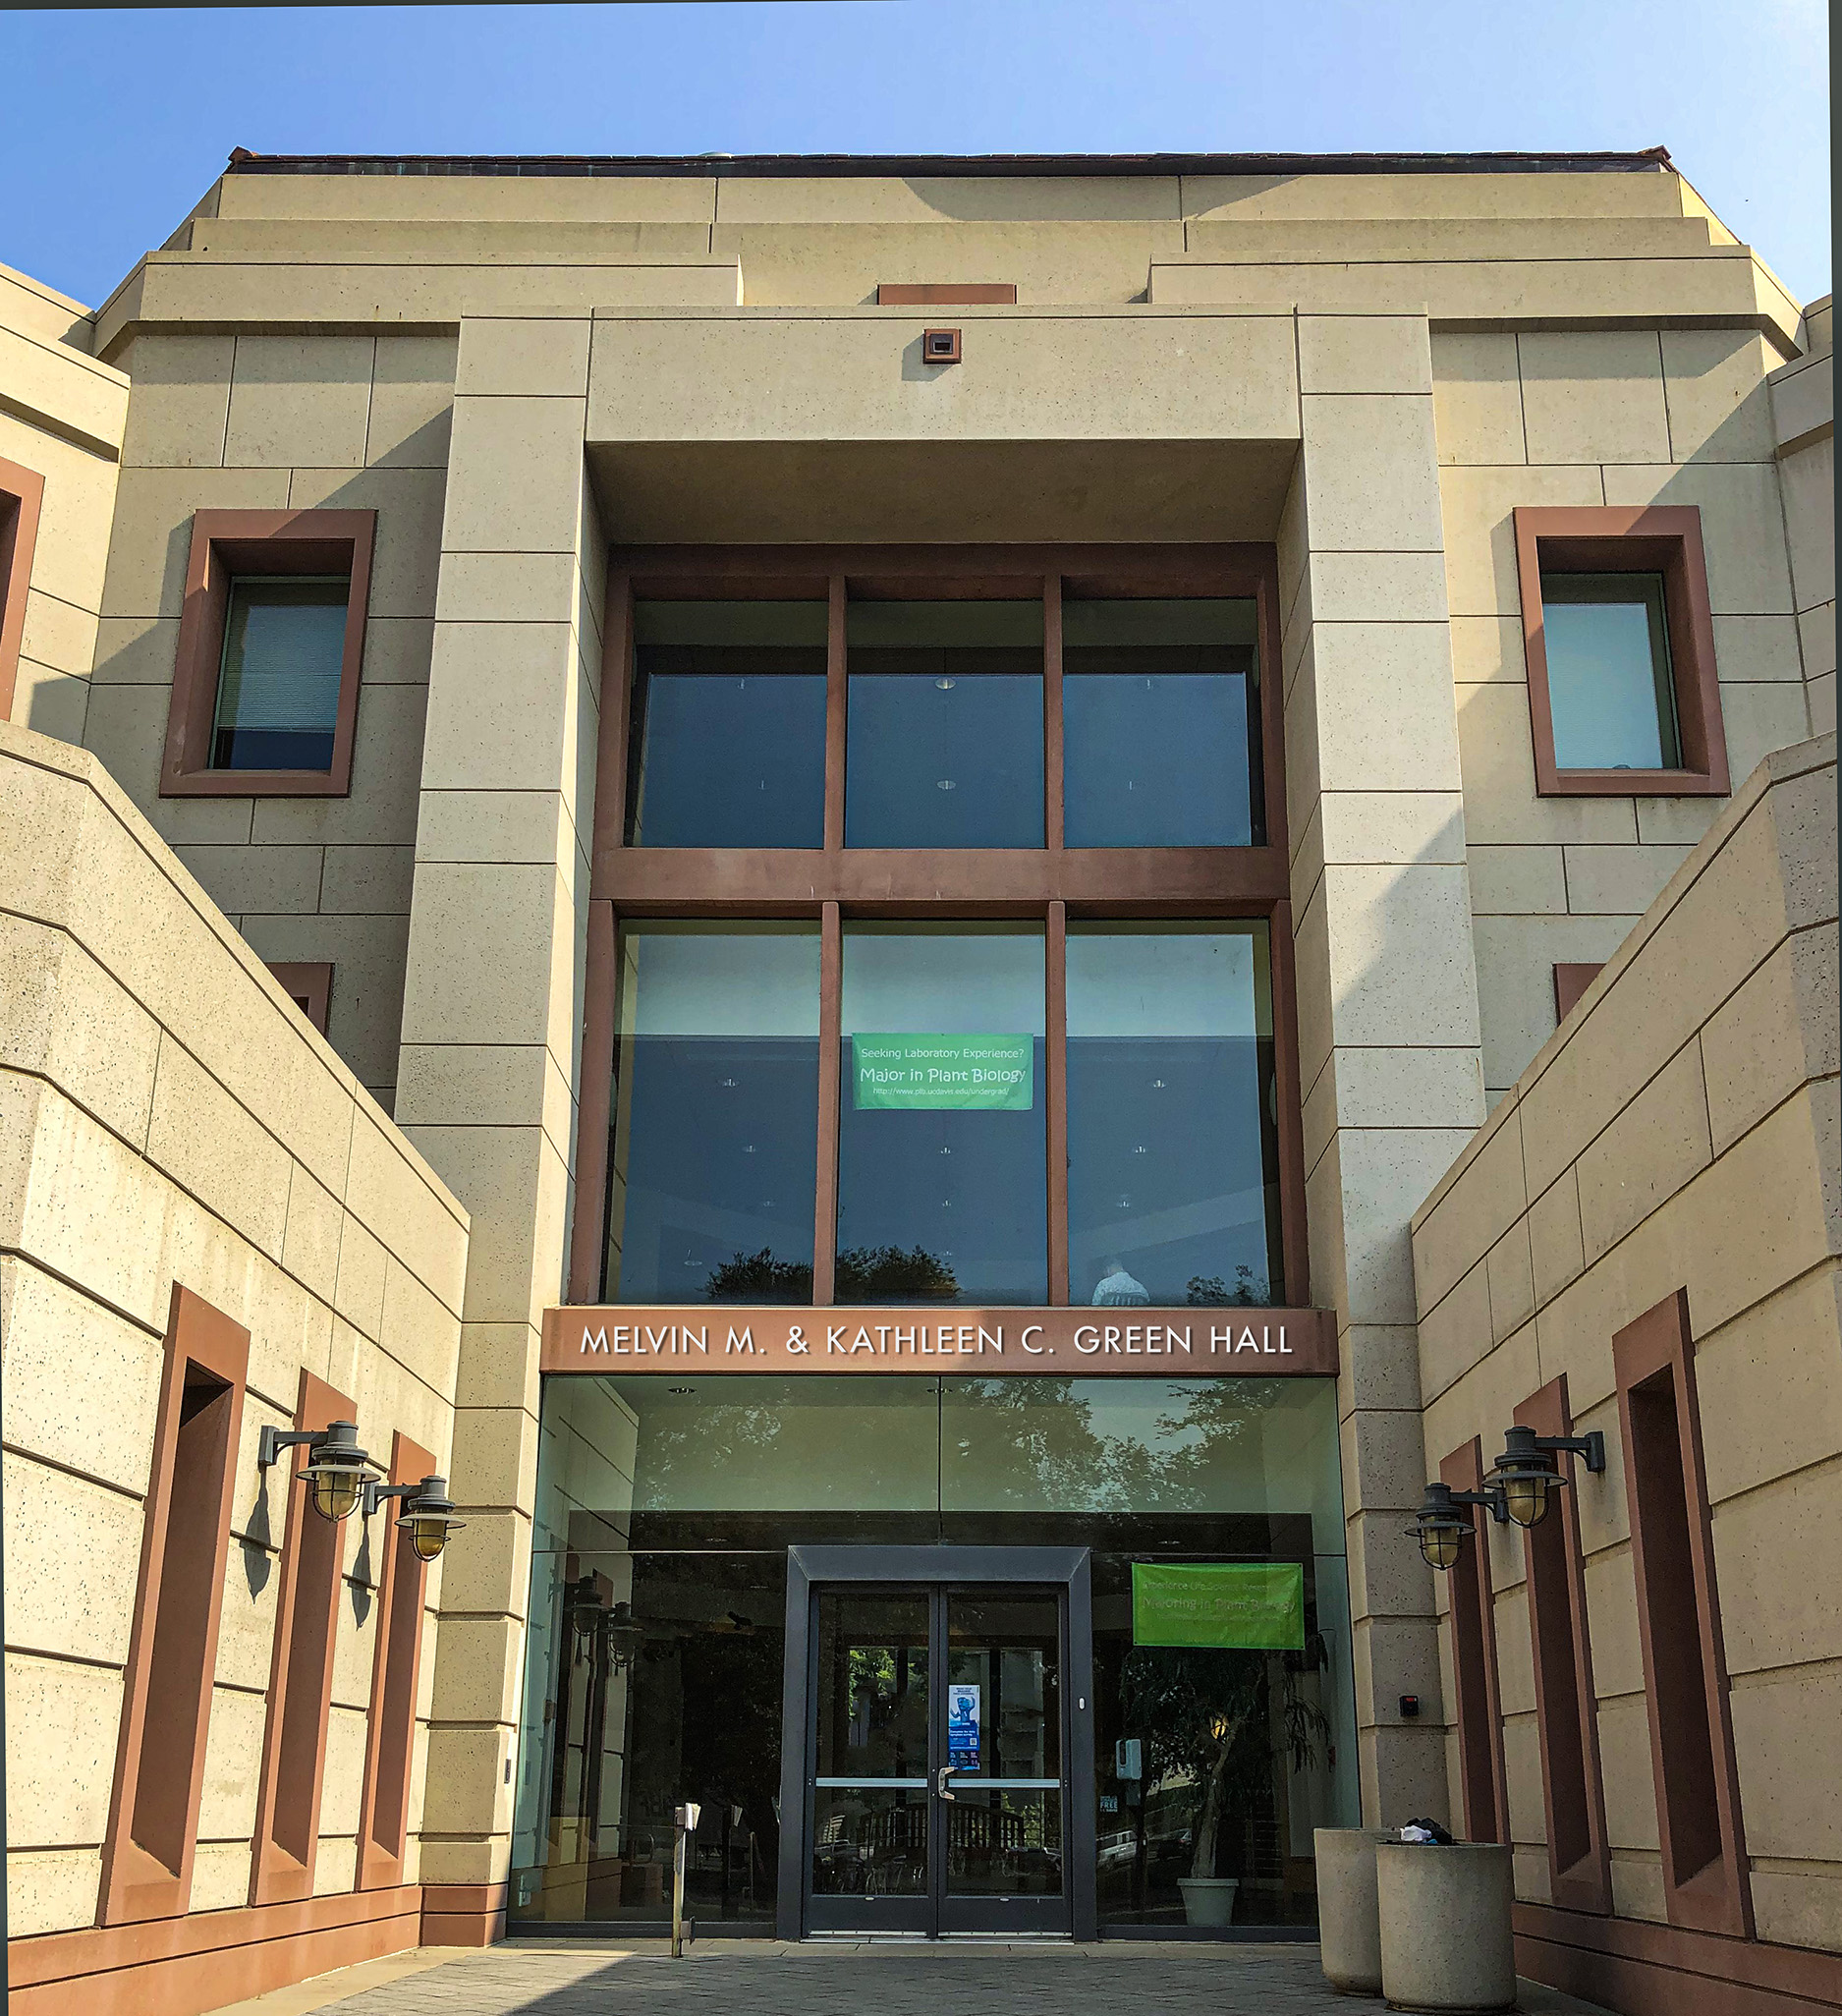 Entrance to Green Hall